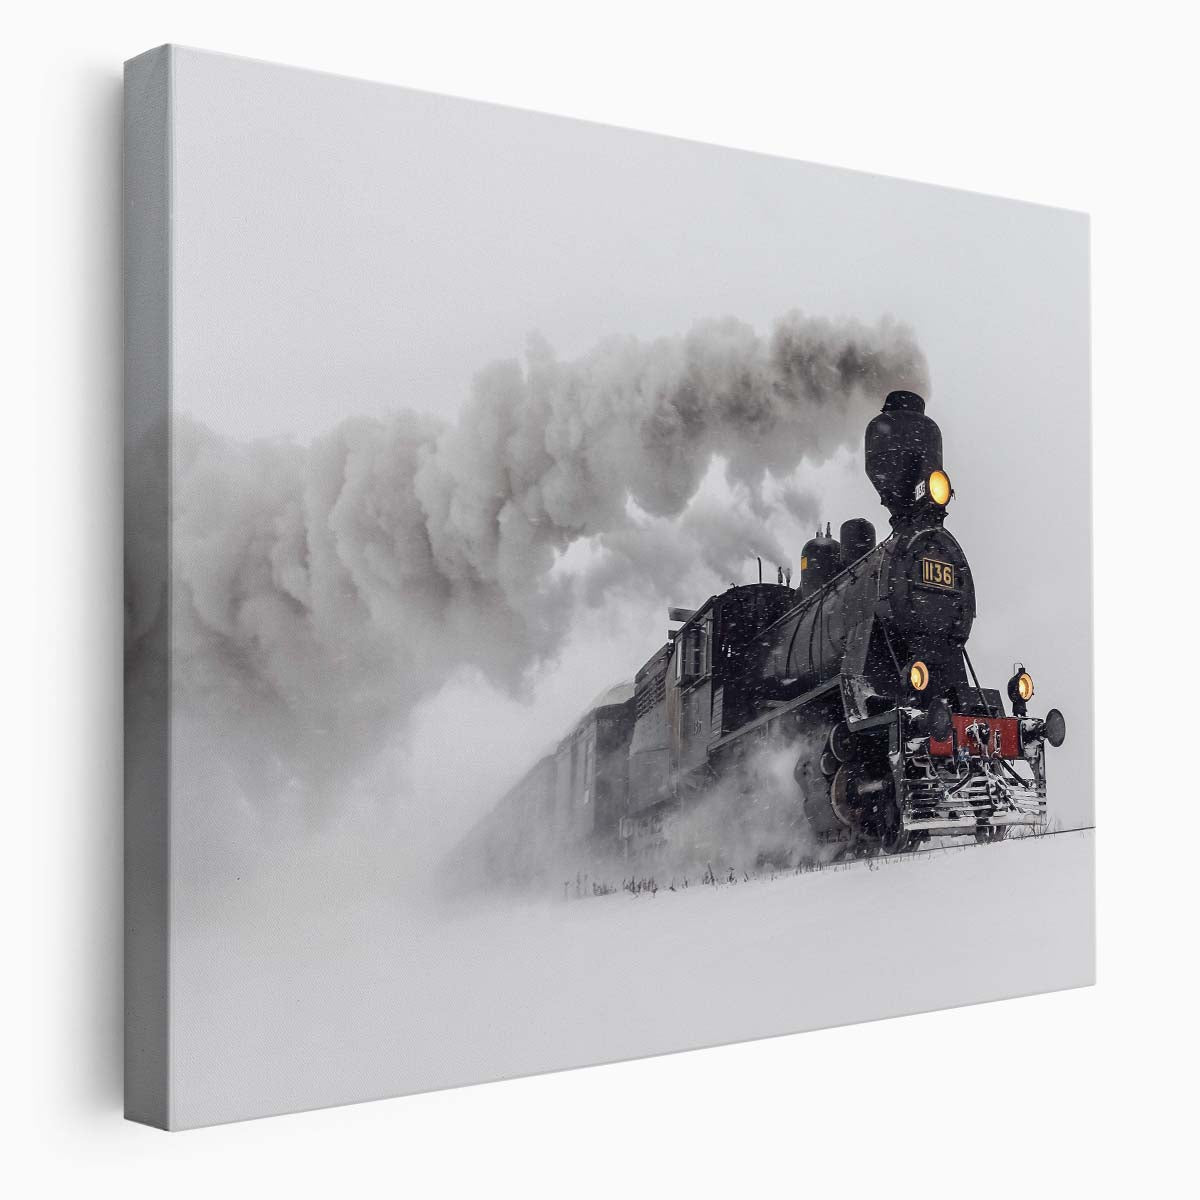 Vintage Steam Train Winter Rush Wall Art by Luxuriance Designs. Made in USA.